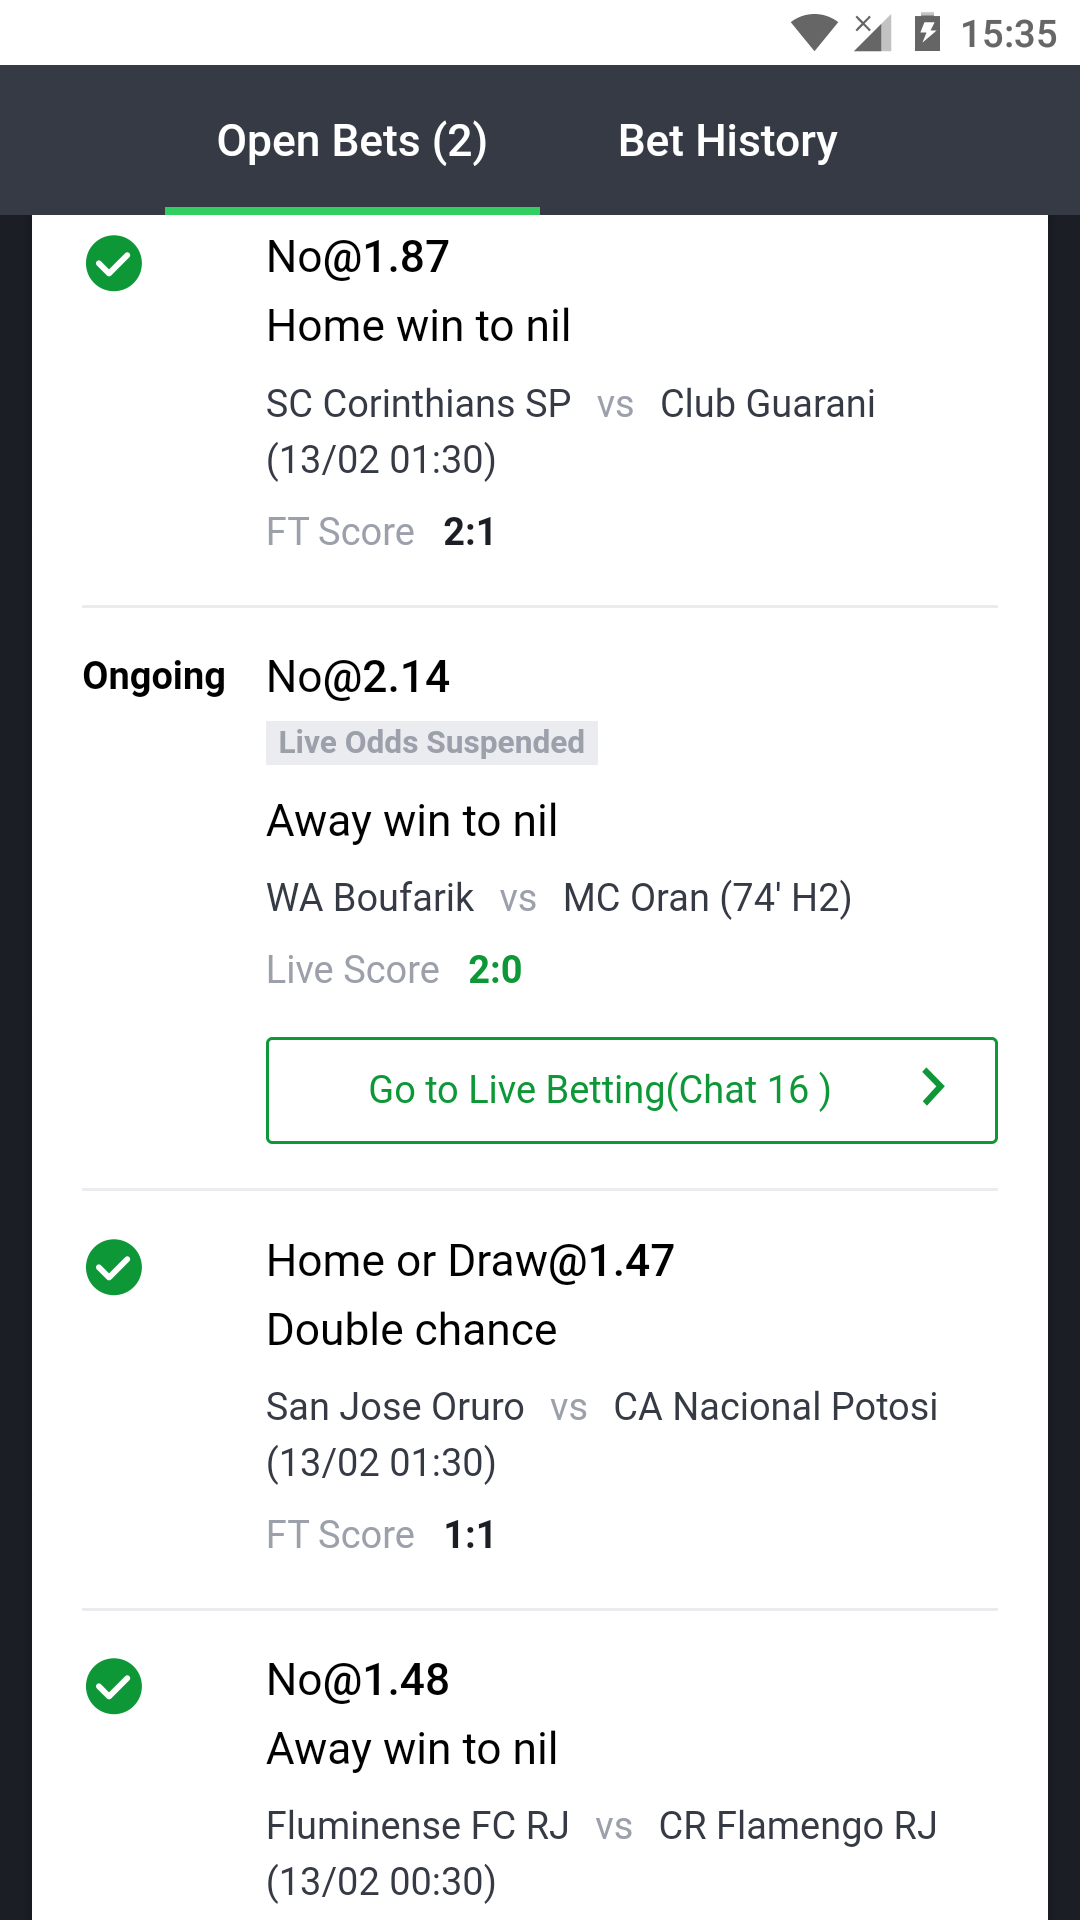 Home Team To Win To Nil Betting Explained